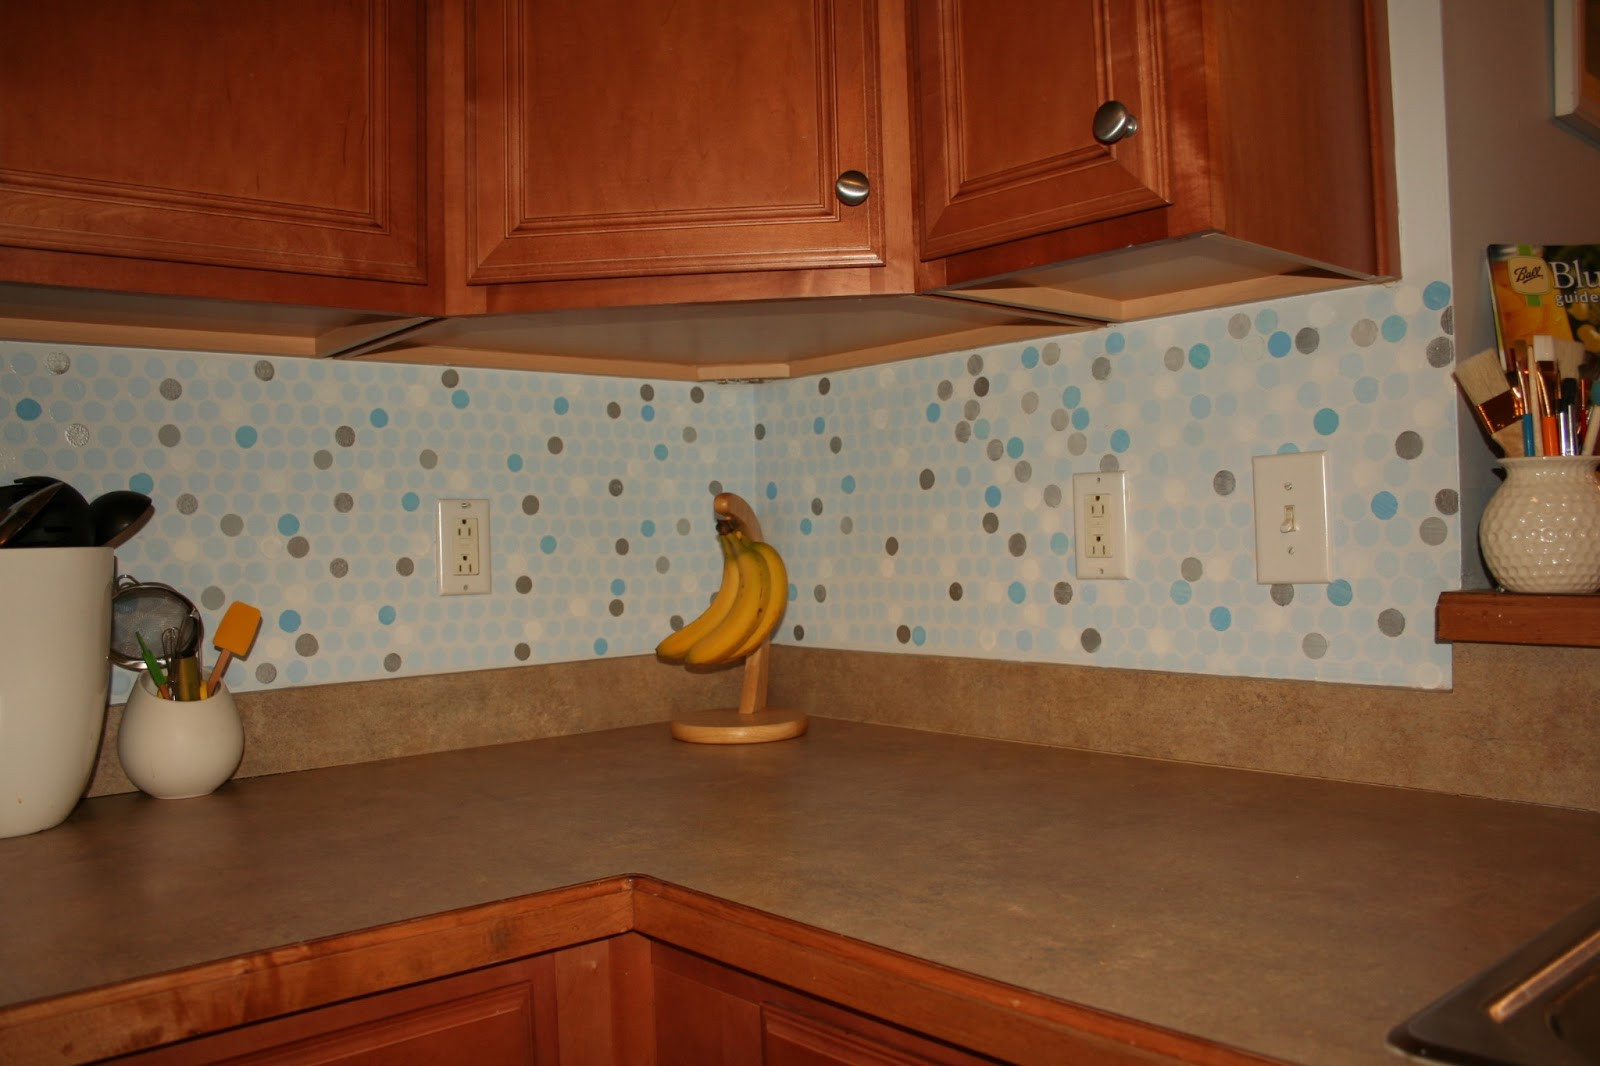 Washable Wallpaper For Kitchen
 Download Washable Wallpaper For Kitchen Backsplash Gallery